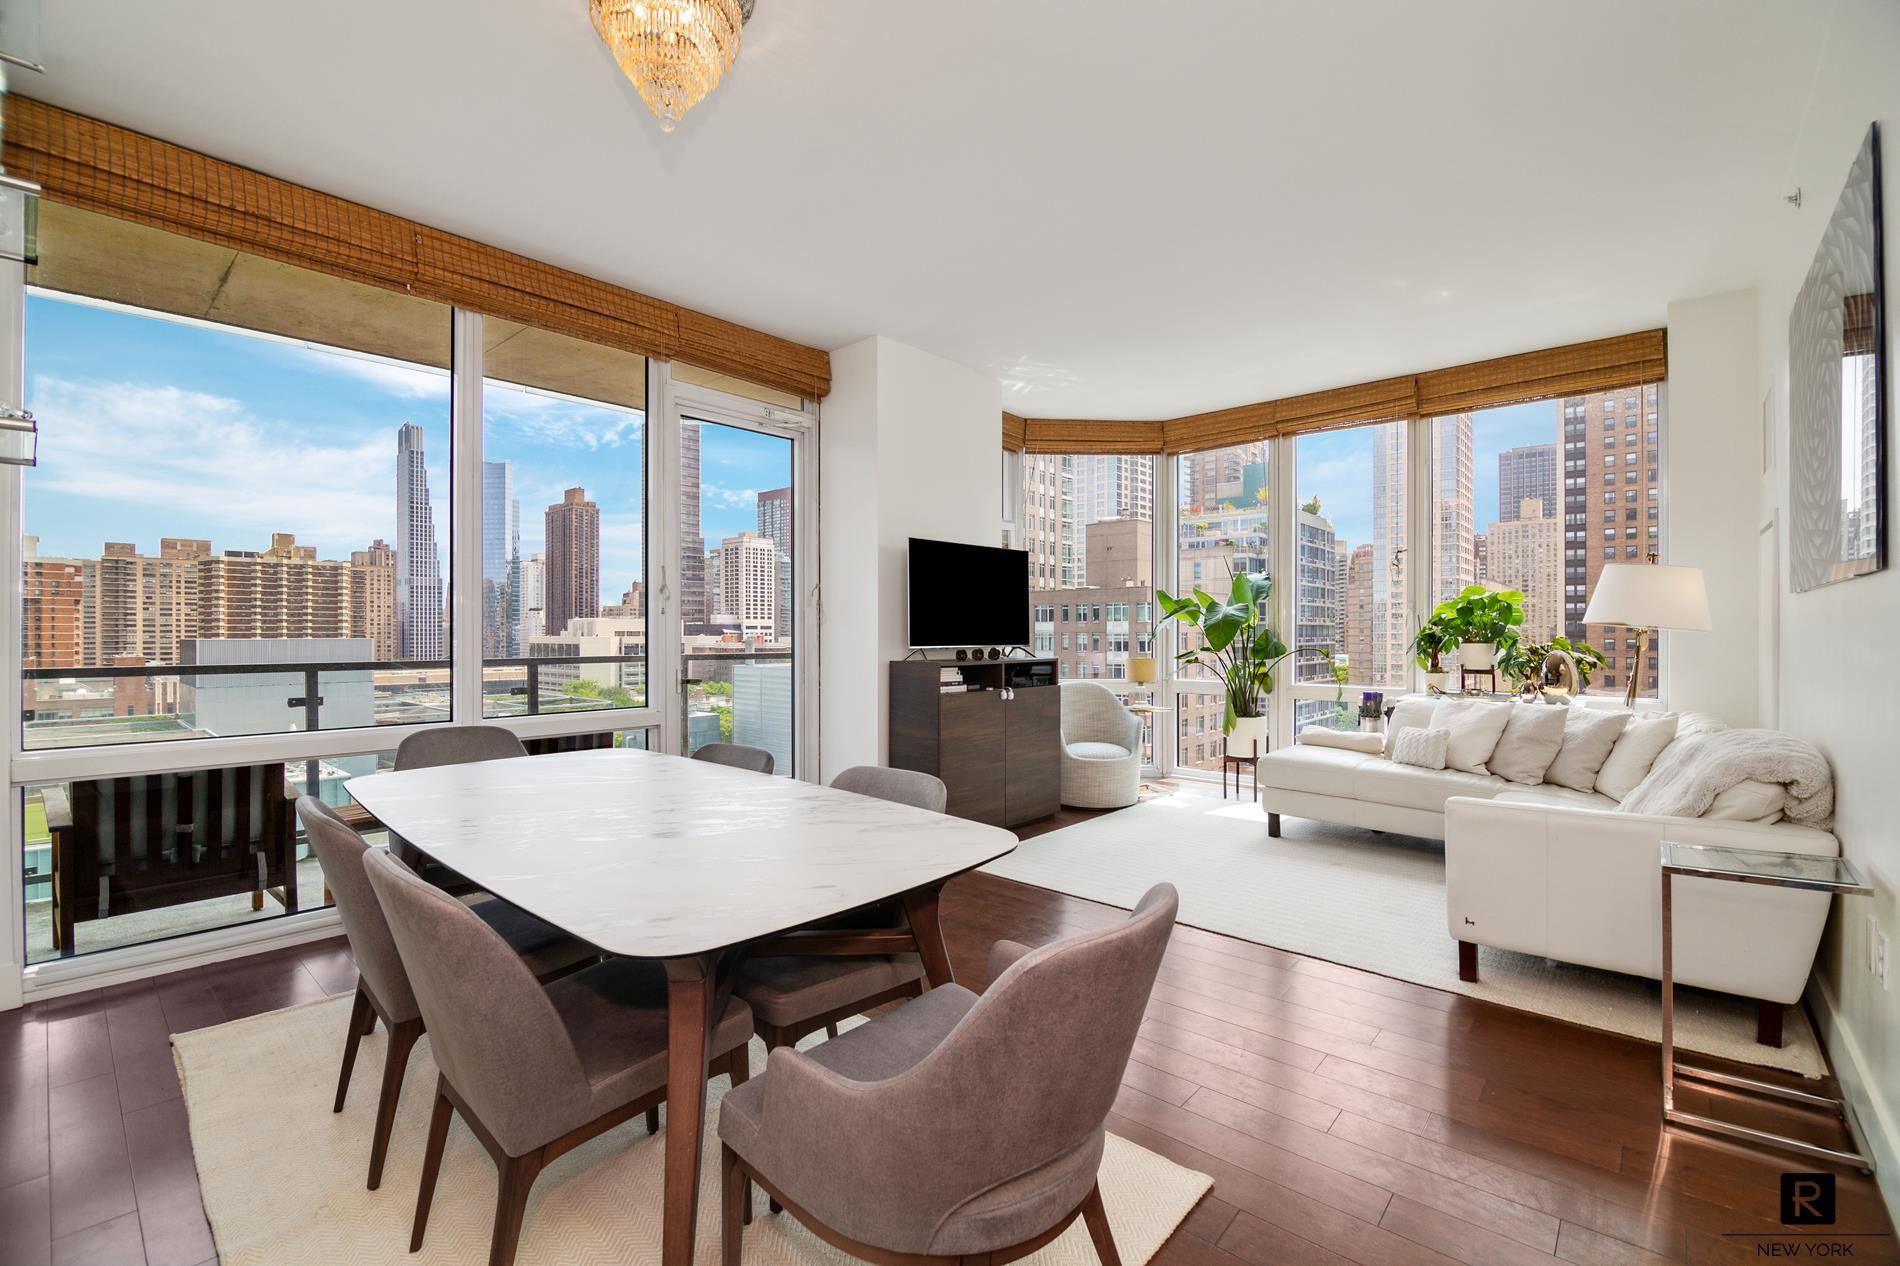 10 West End Avenue 18-A, Lincoln Square, Upper West Side, NYC - 2 Bedrooms  
2 Bathrooms  
5 Rooms - 